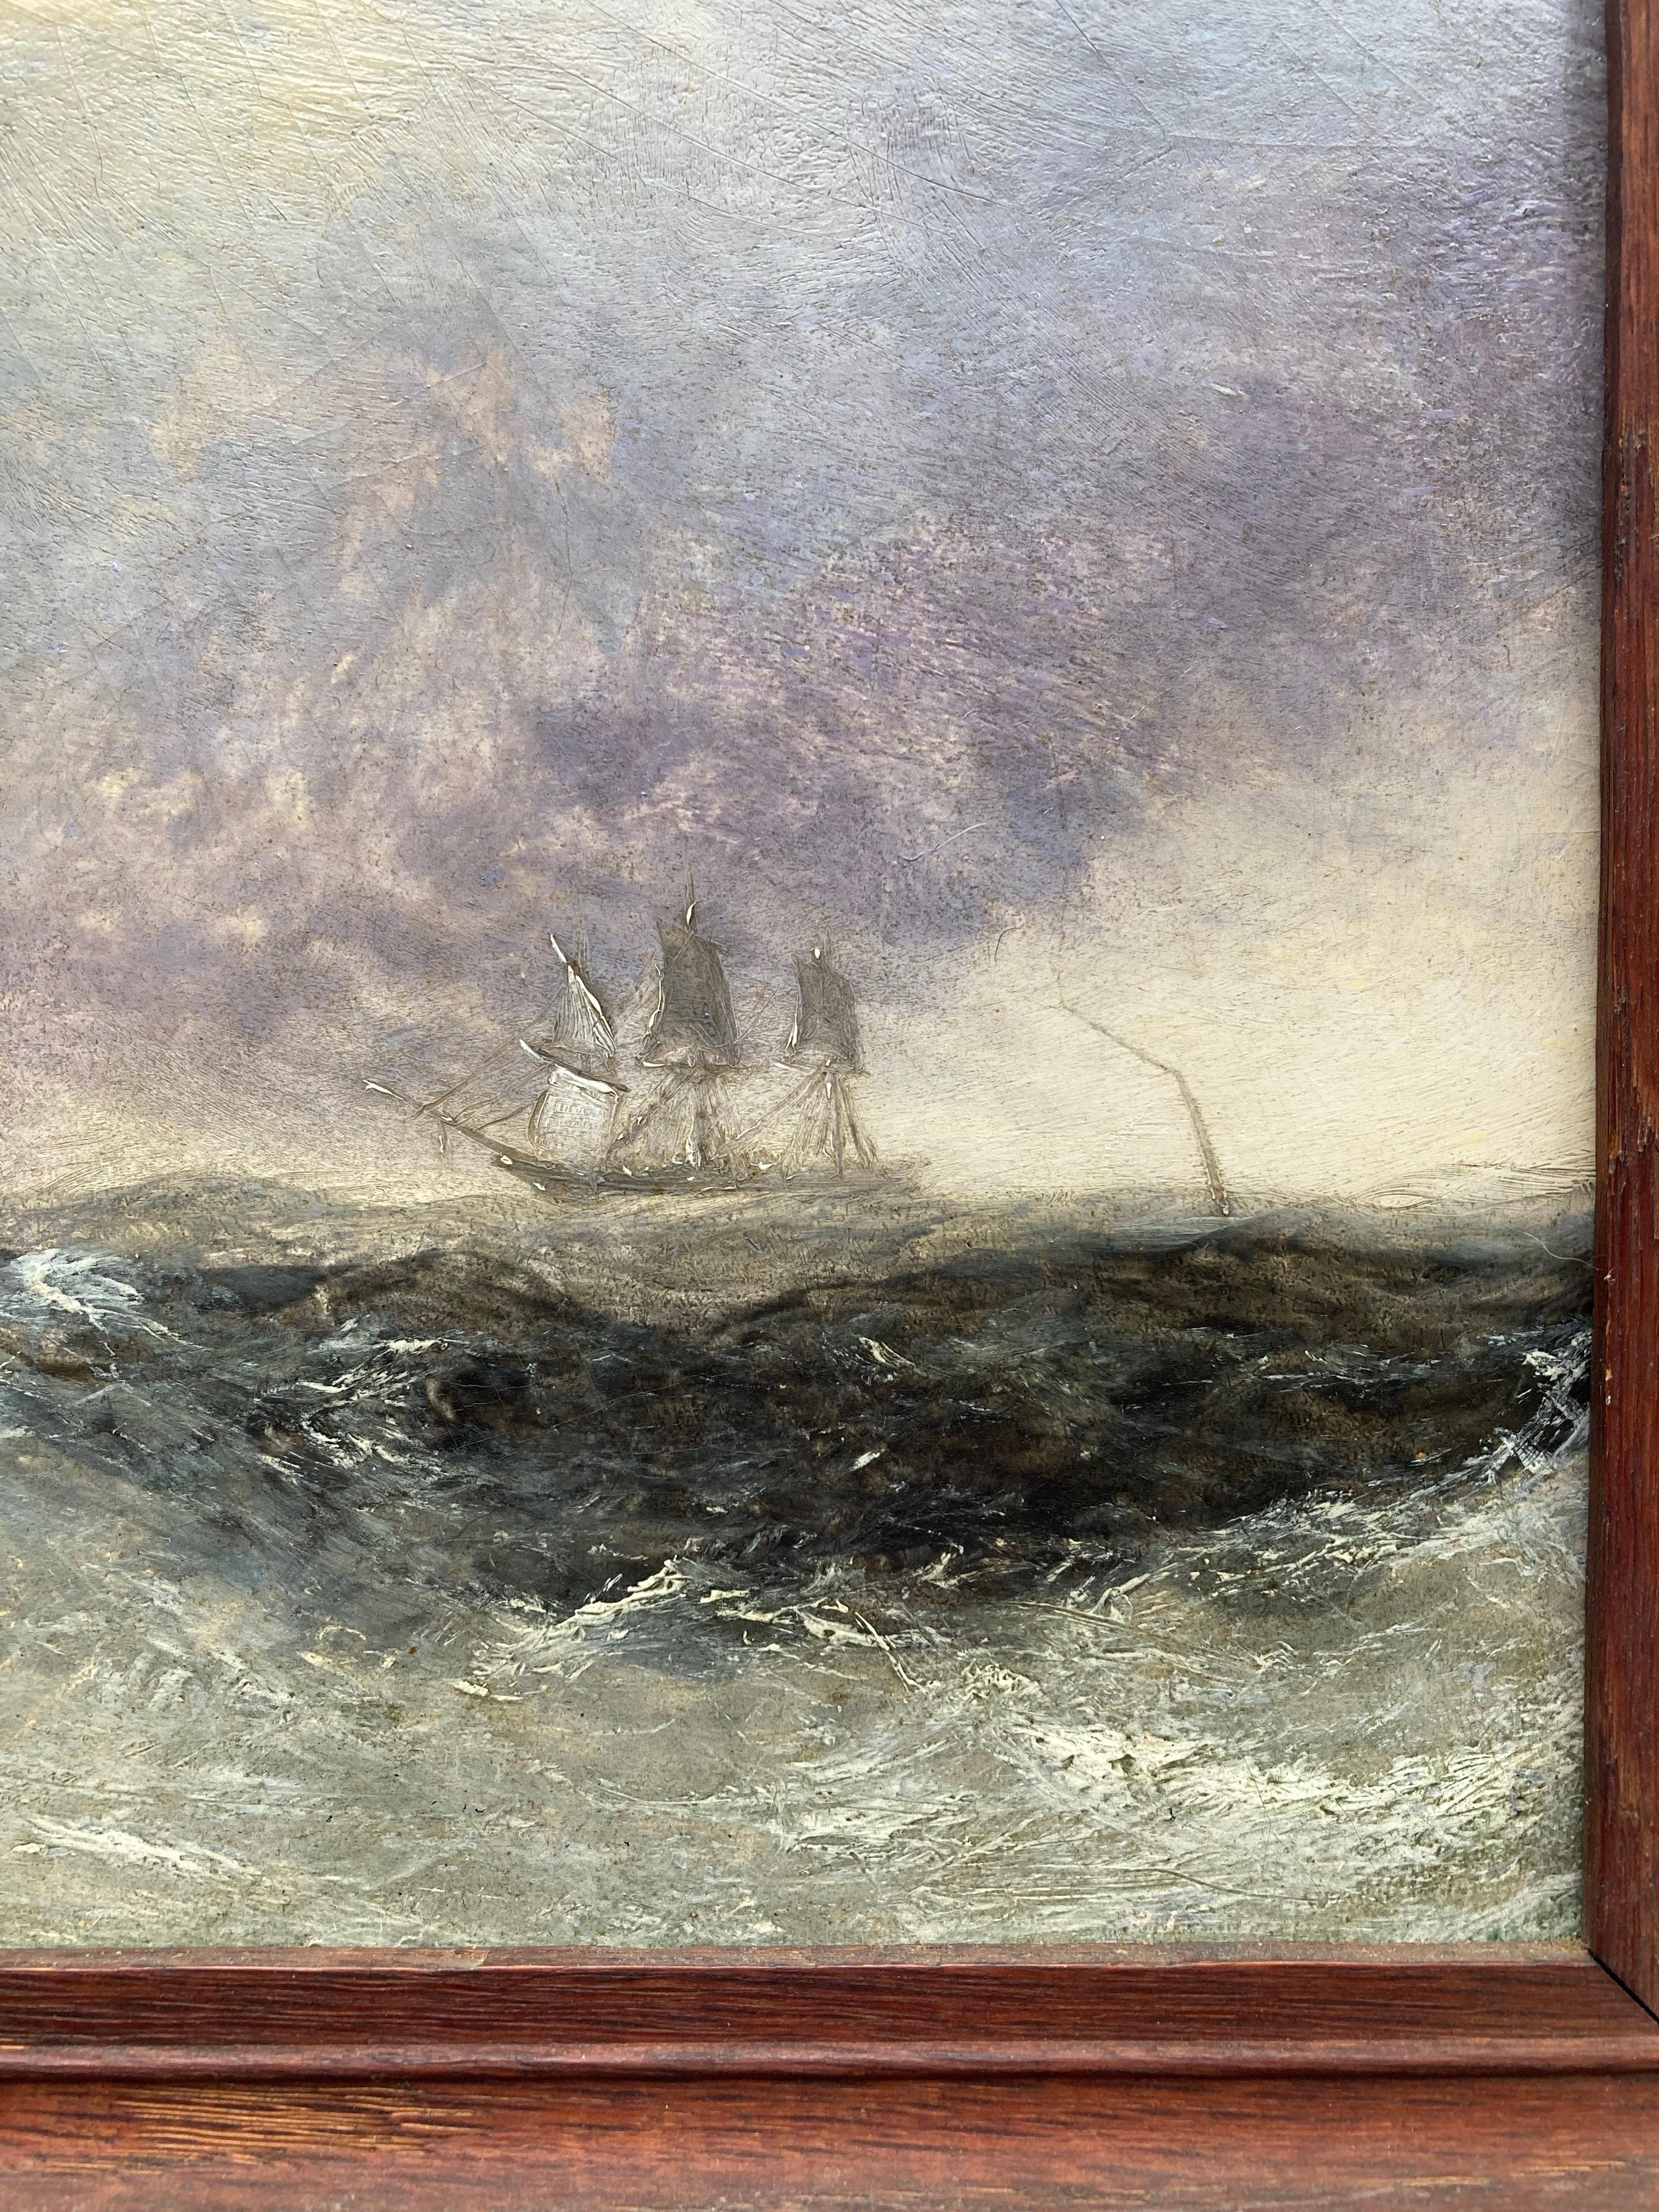 A very dramatic marine scene with the translucency of the waves captured with incredible skill and vision.

Attributed to Miles Edmund Cotman (1810-1858)
Shipping in rough seas
Oil on board
7 x 10 inches

The eldest son of John Sell Cotman, Miles